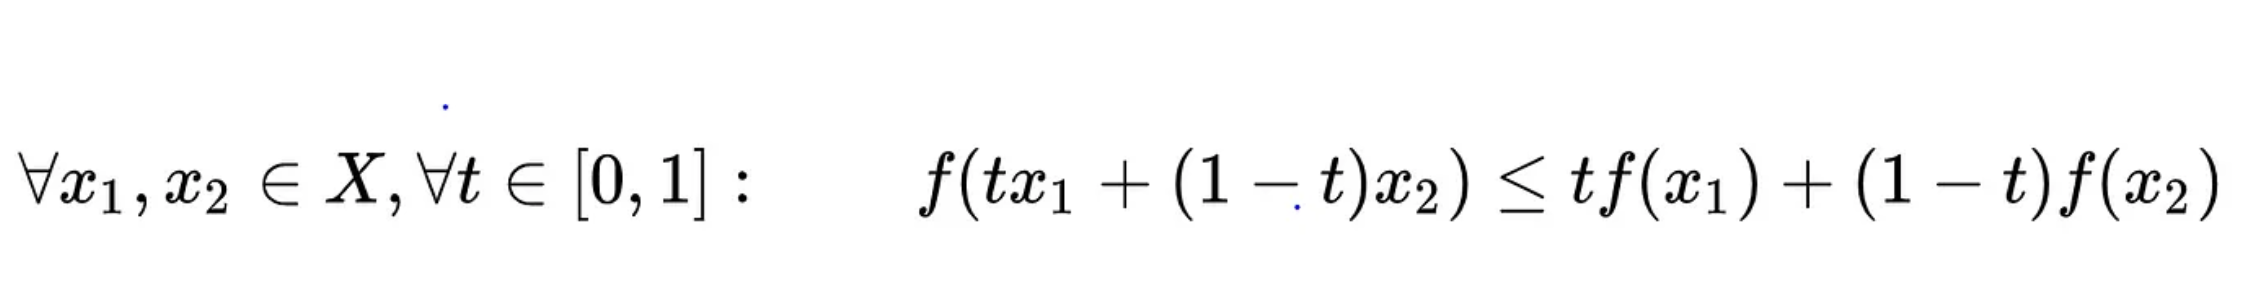 Function definition for the Loss Function